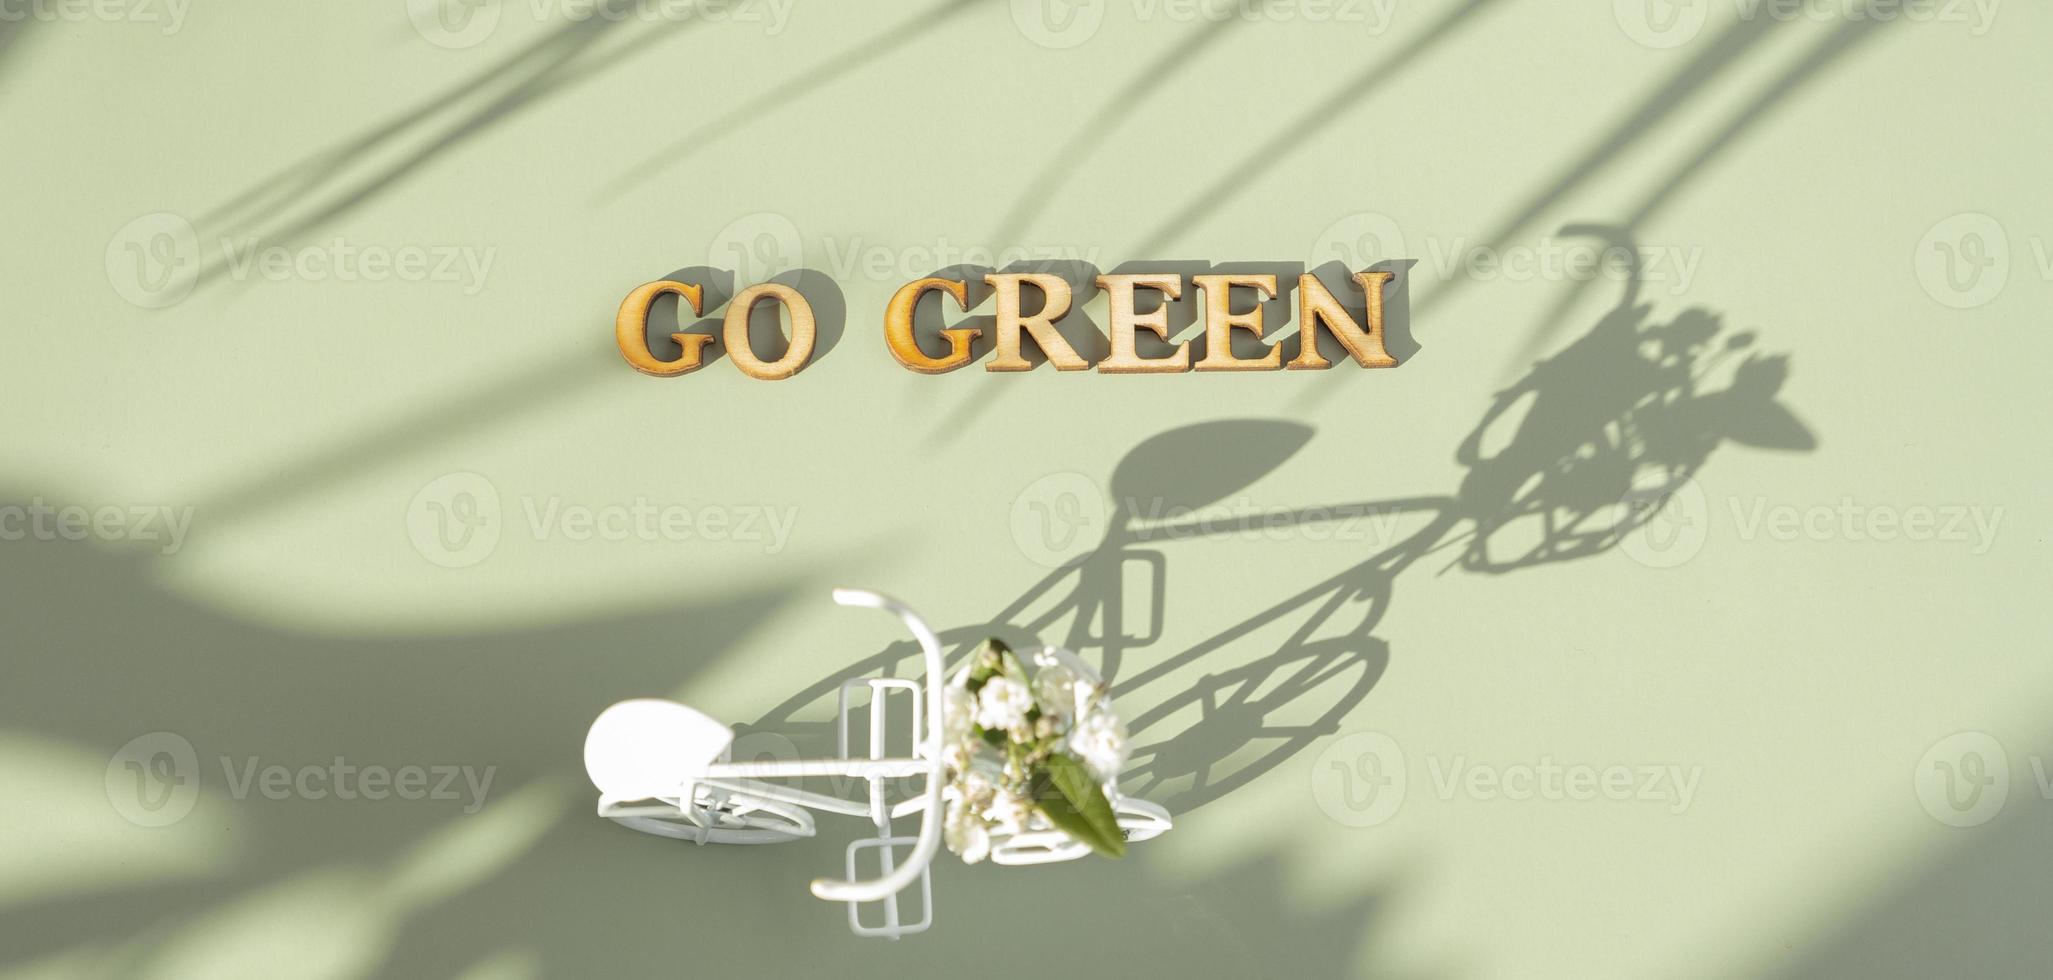 Go green text with bycicle on green background with hard shadows. Sustainable lifestyle concept photo